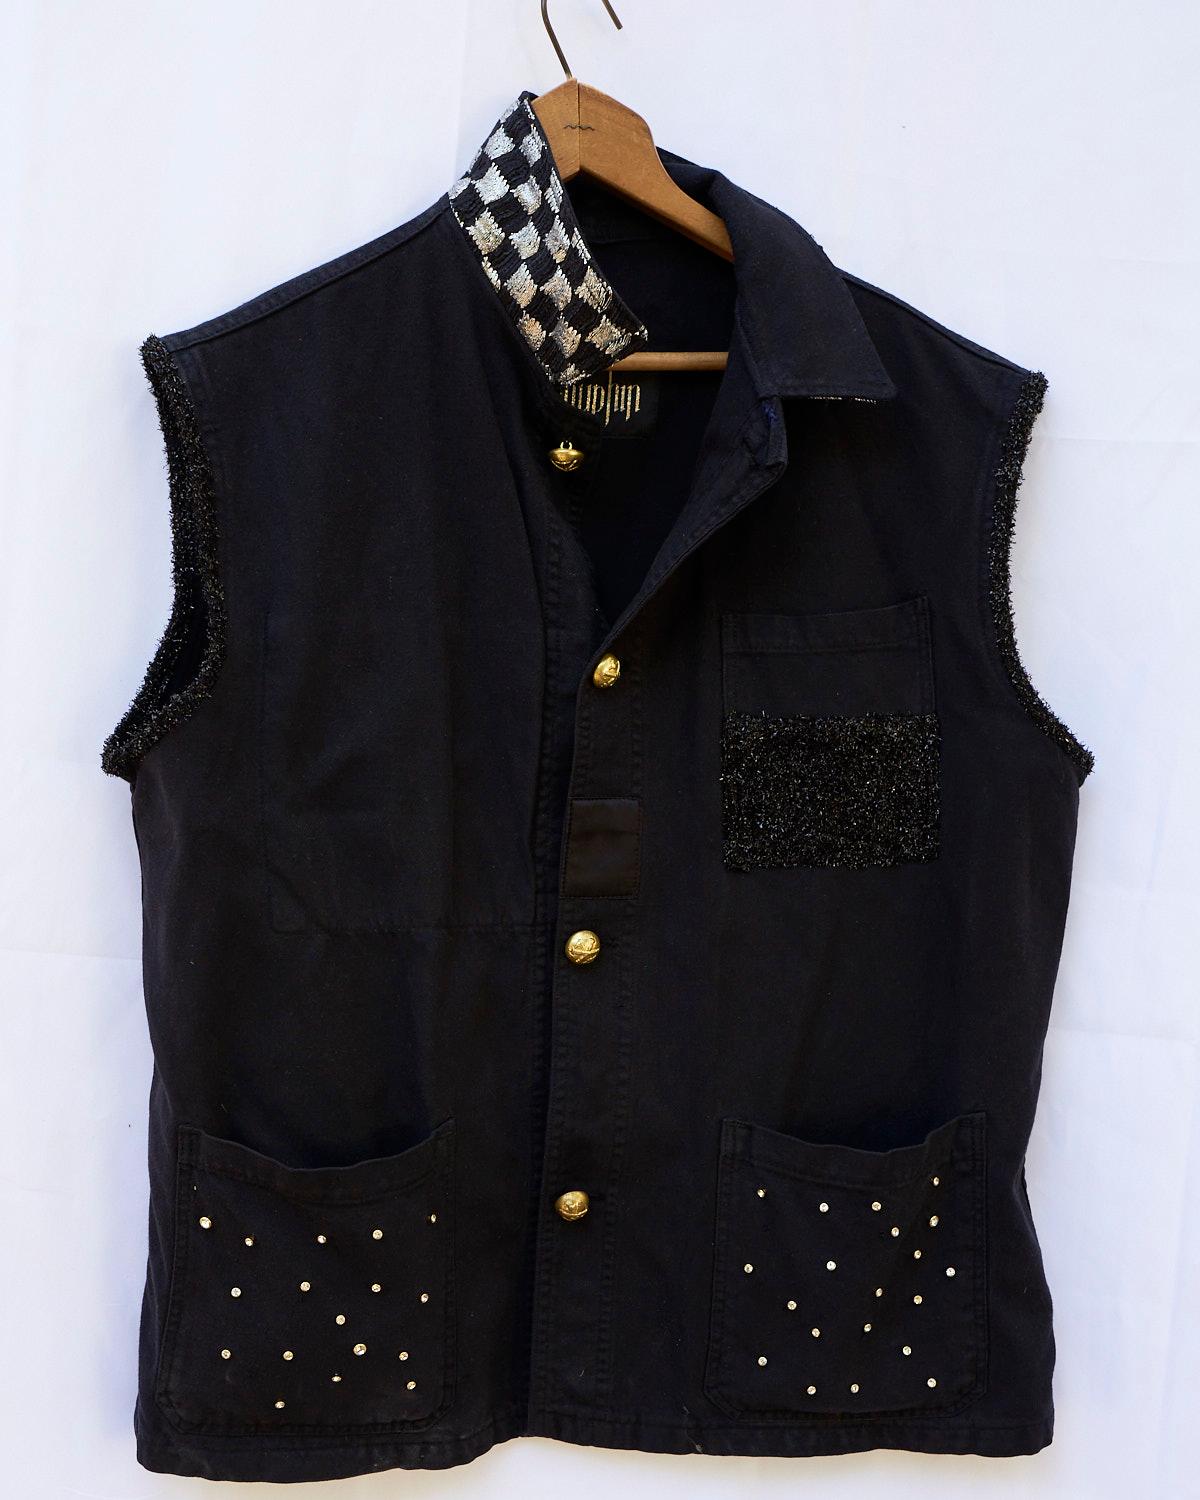 Sleeveless Jacket Vest Black Crystal Embellished Gold Buttons J Dauphin In New Condition In Los Angeles, CA